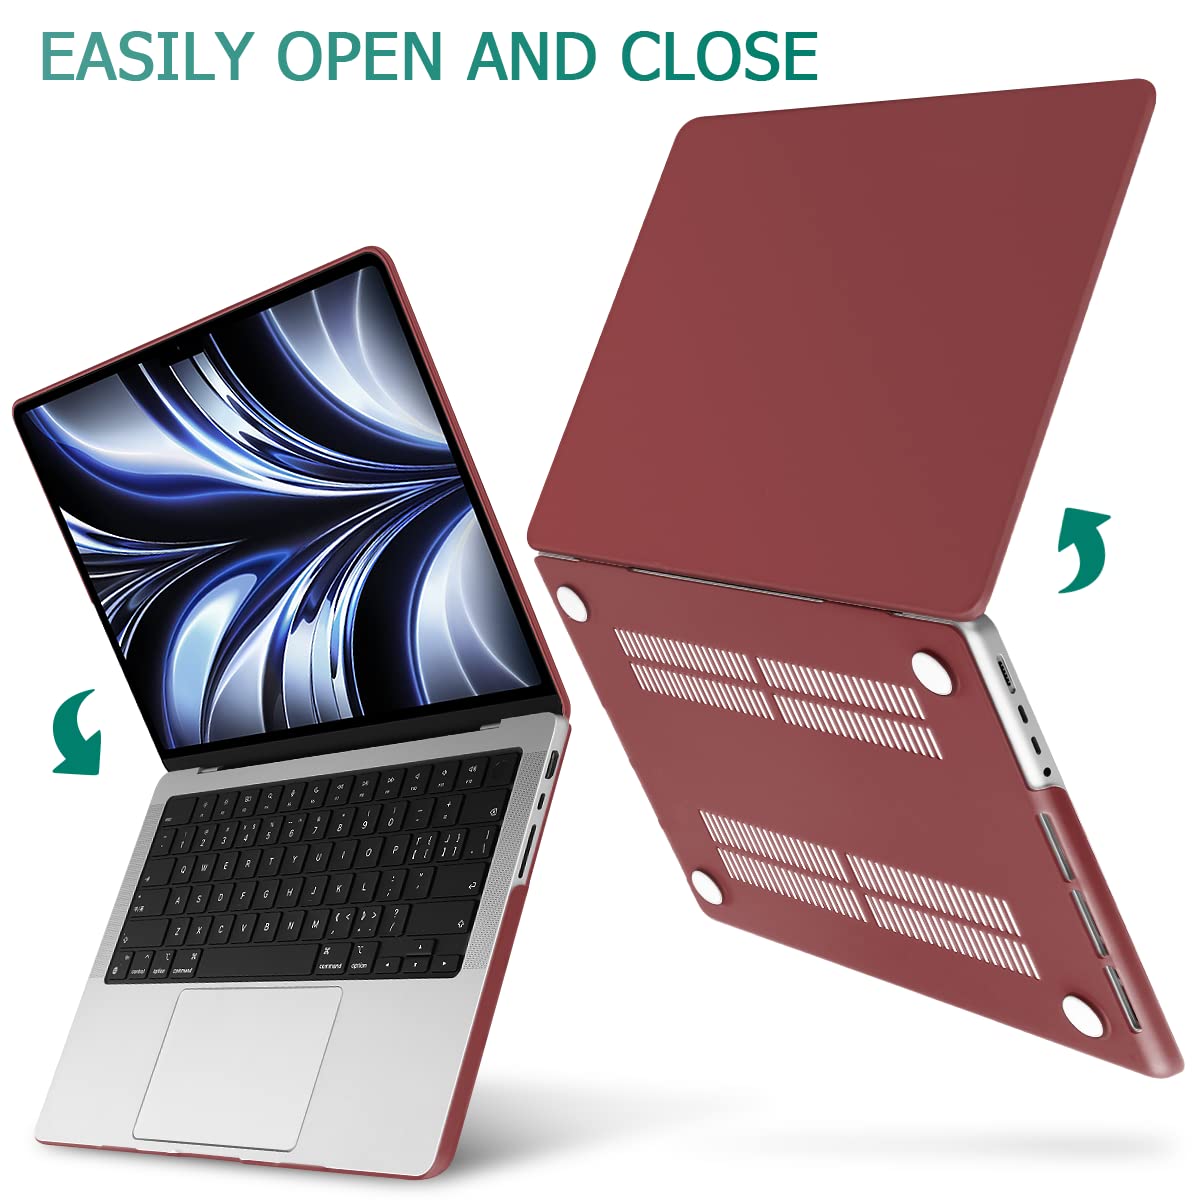 Suitable for  MacBook Pro 14 Max Inch Case 2023 2022 2021 M2 A2779 M1 A2442 Hardshell Case Keyboard Cover Wine Red